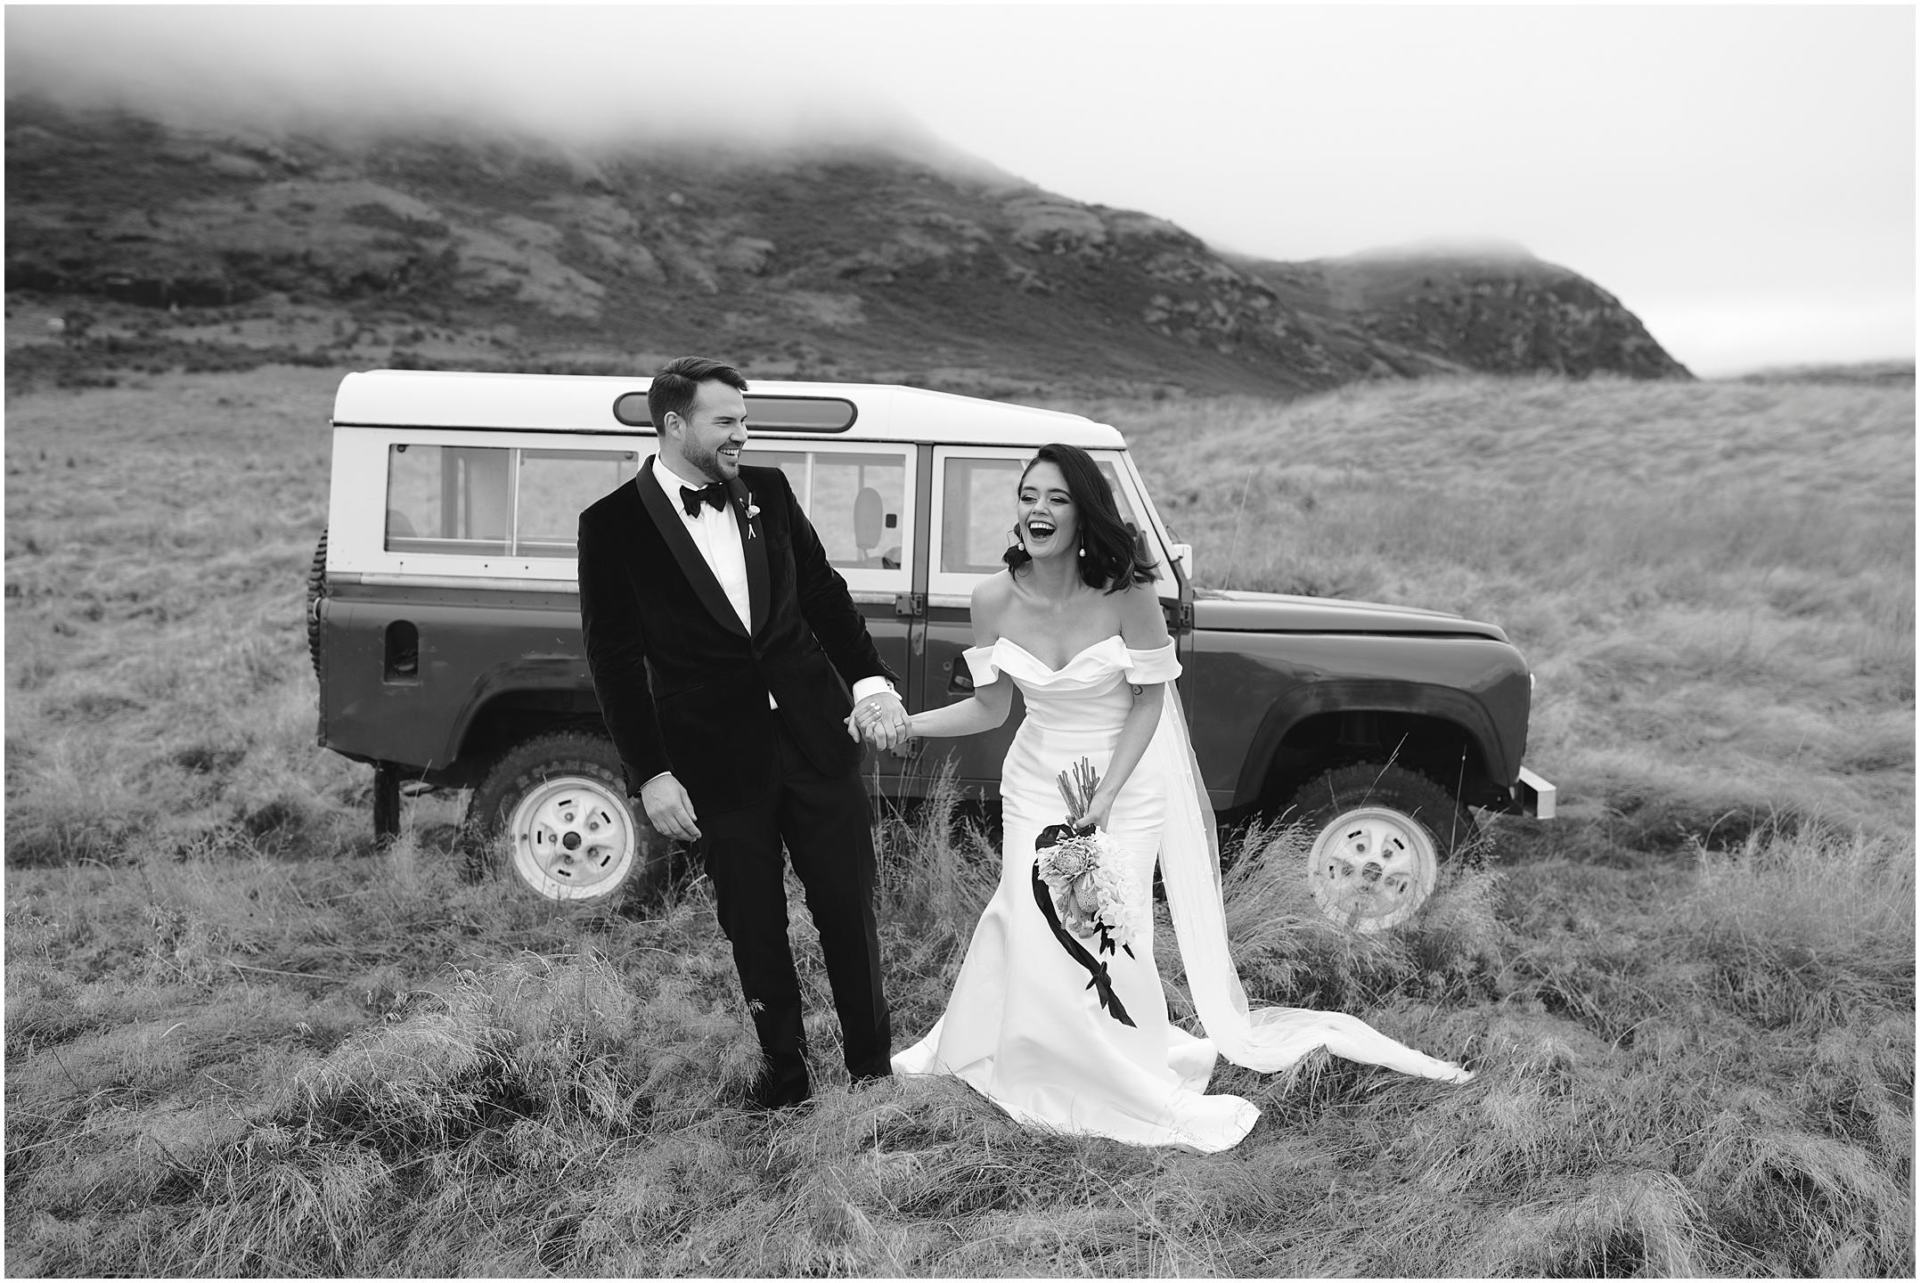 Charlotte Kiri Photography - Wedding Photography black and white of a bride wearing a gorgeous strapless dress holding hands, with her groom who wears a smart black tuxedo suit, as they walk hand in hand laughing in front of a Range Rover truck in a field with mountains behind in Wanaka, New Zealand.